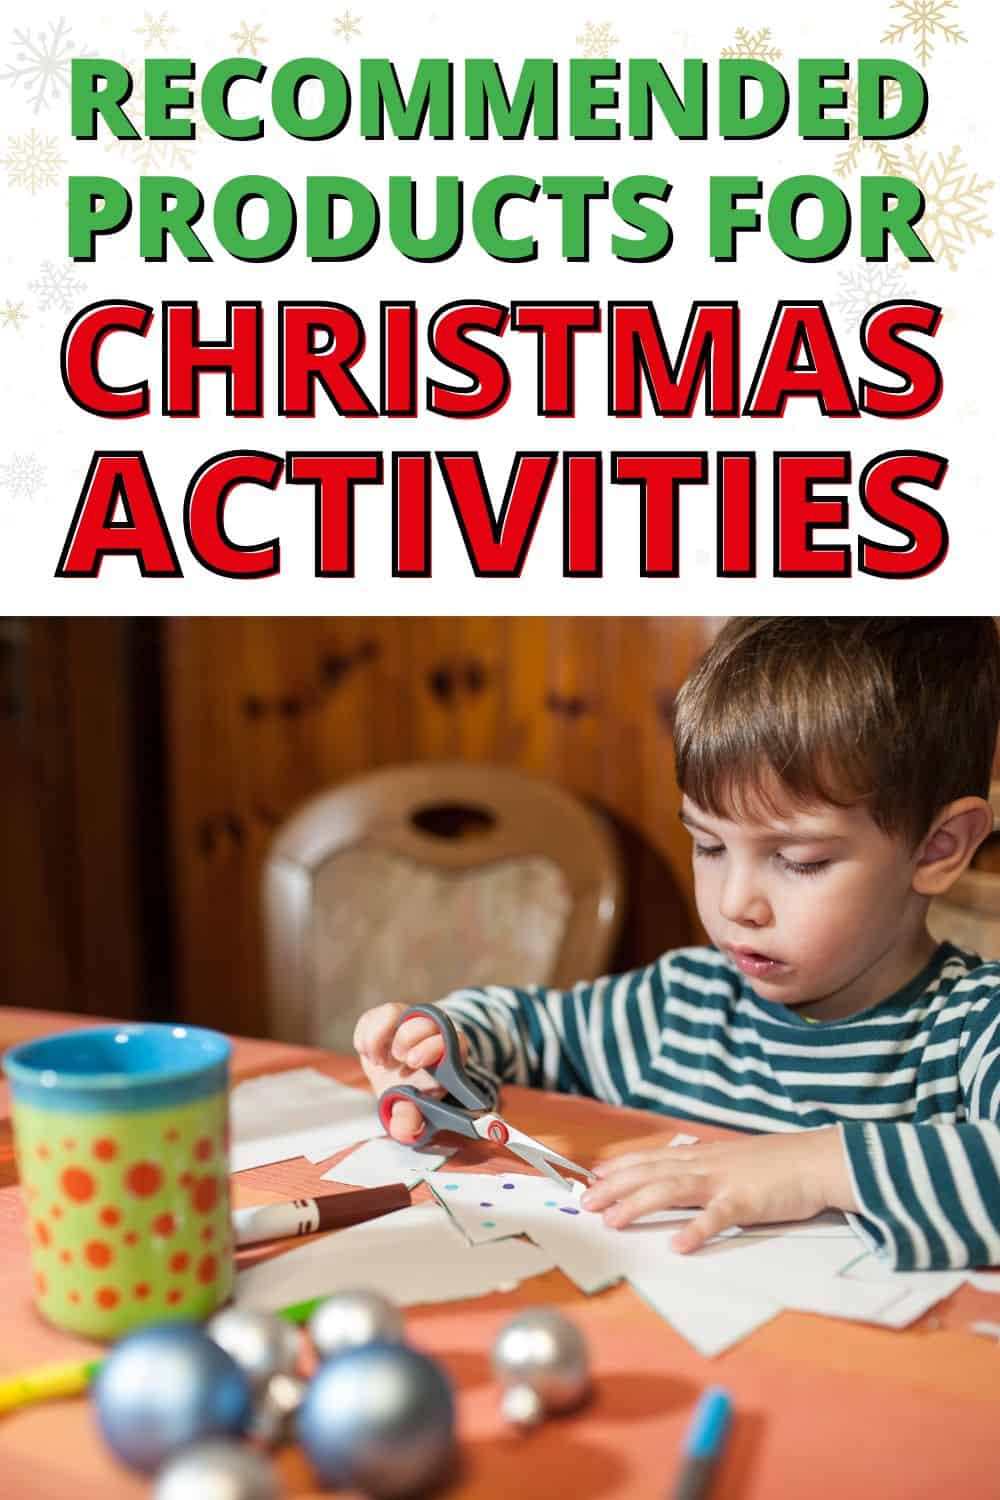 feature image + recommended products for Christmas crafts and activities